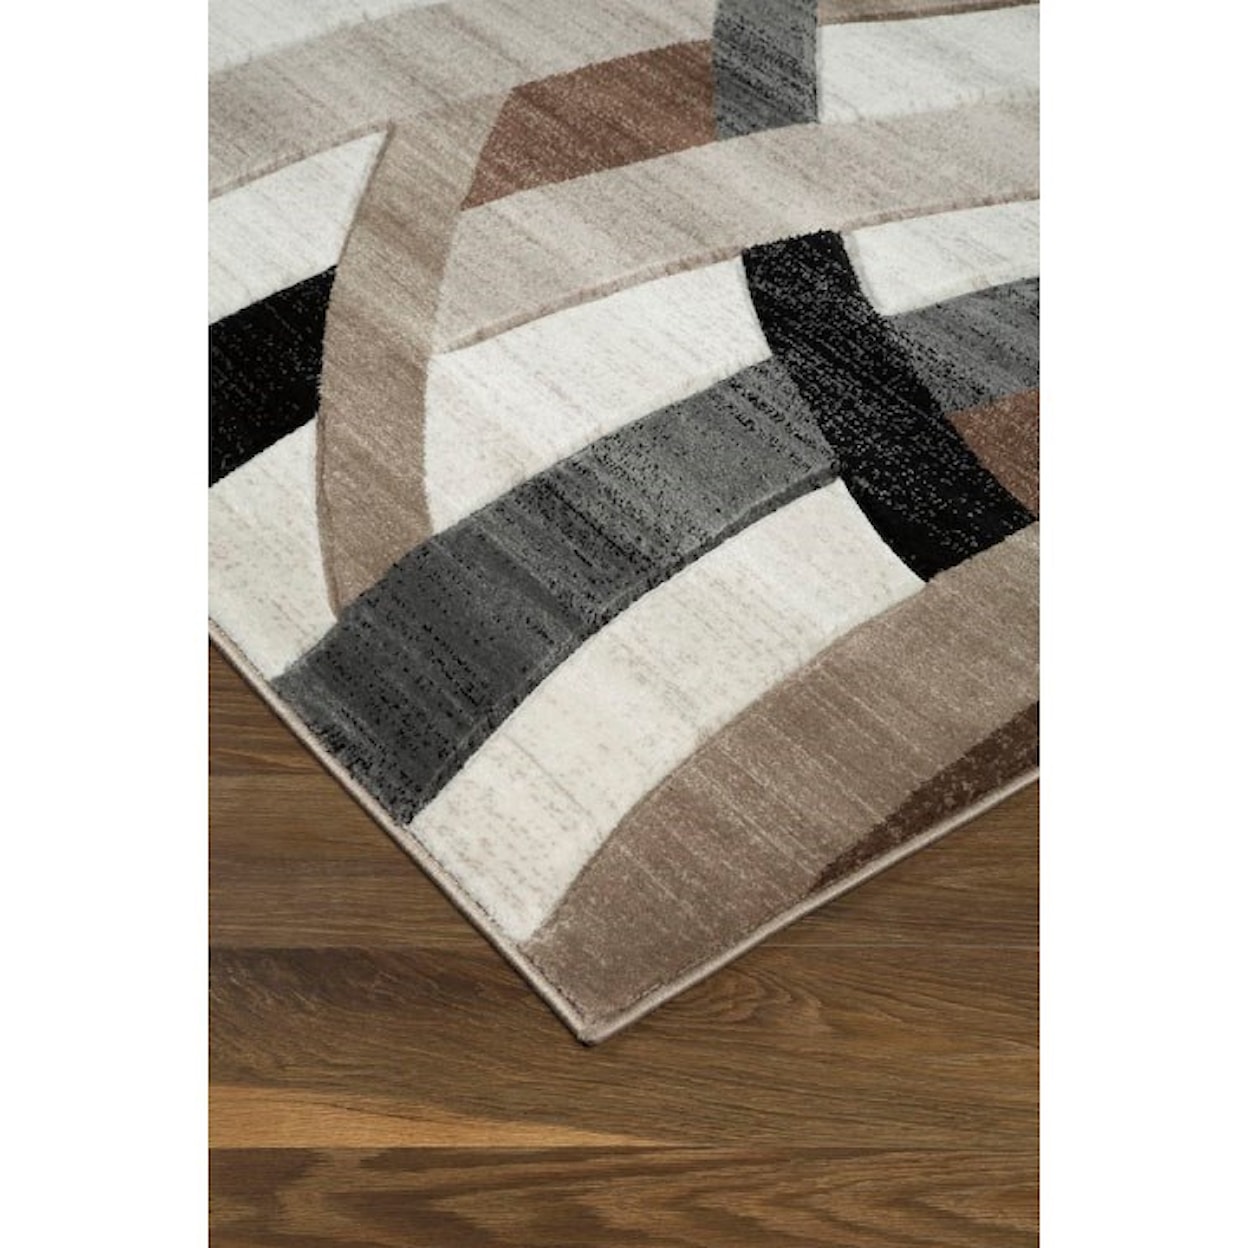 Ashley Furniture Signature Design Contemporary Area Rugs Jacinth Brown Large Rug